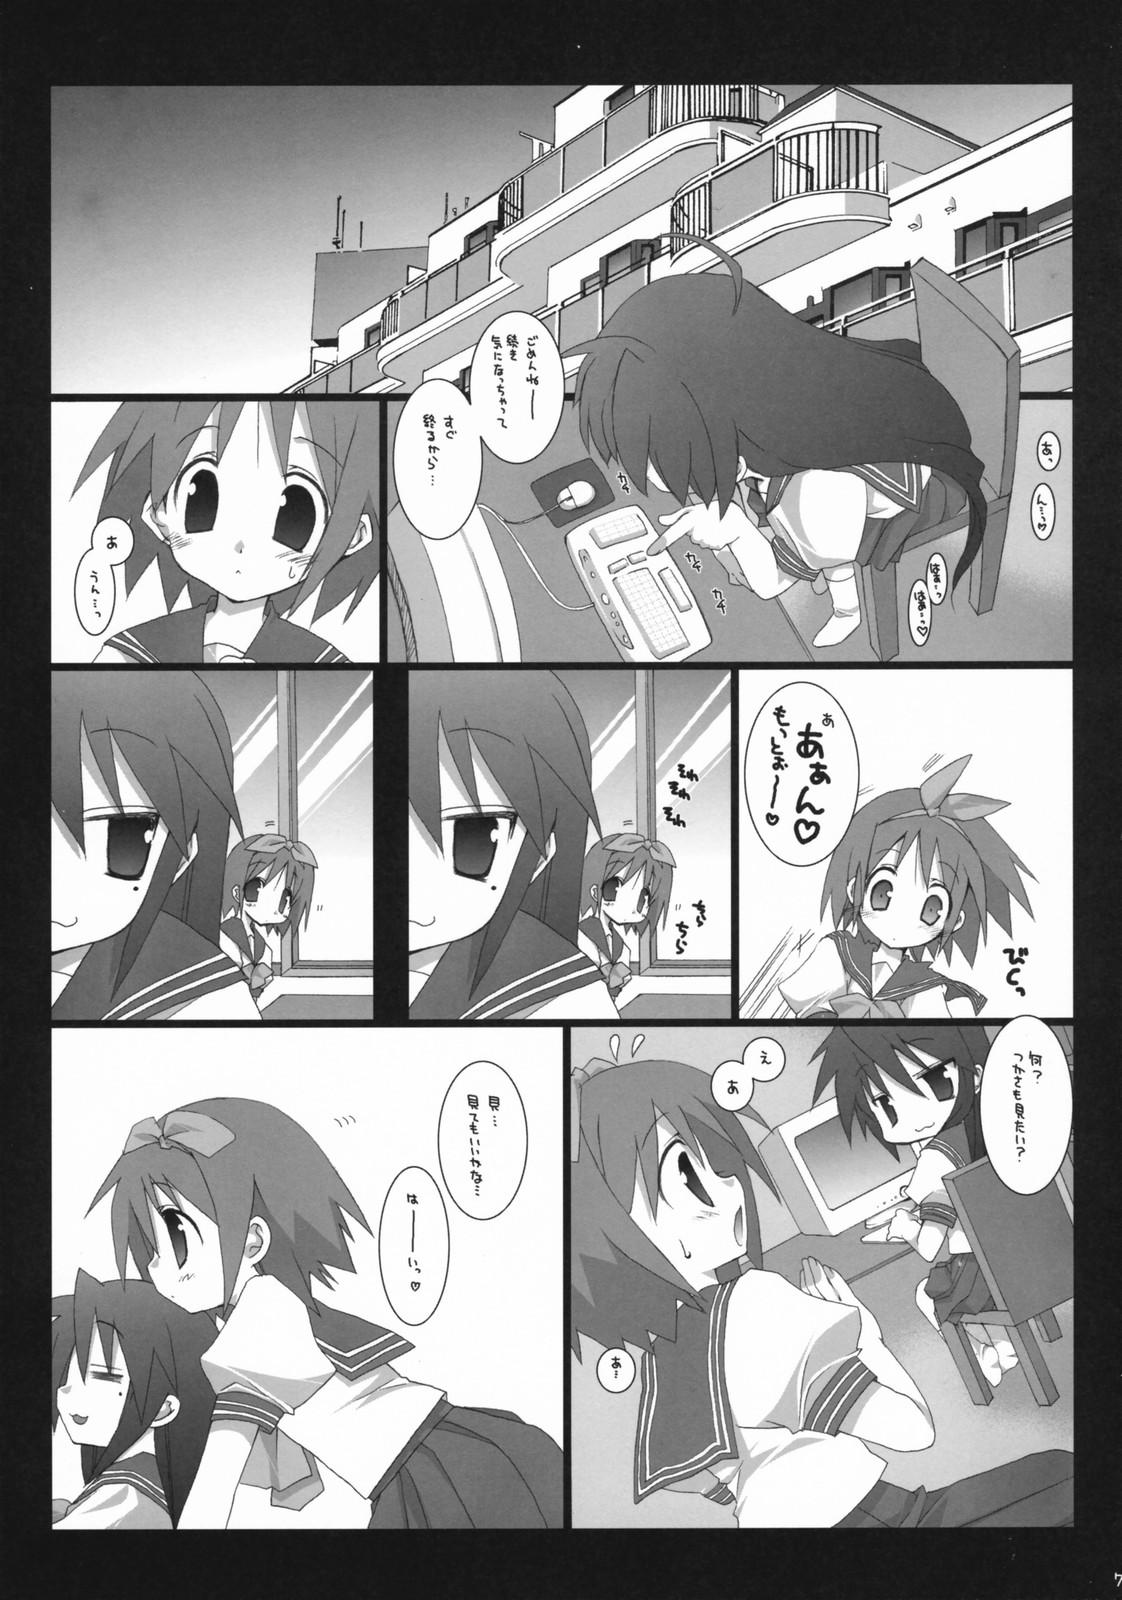 Load Darlin's Freeze!! - Lucky star Tan - Page 6